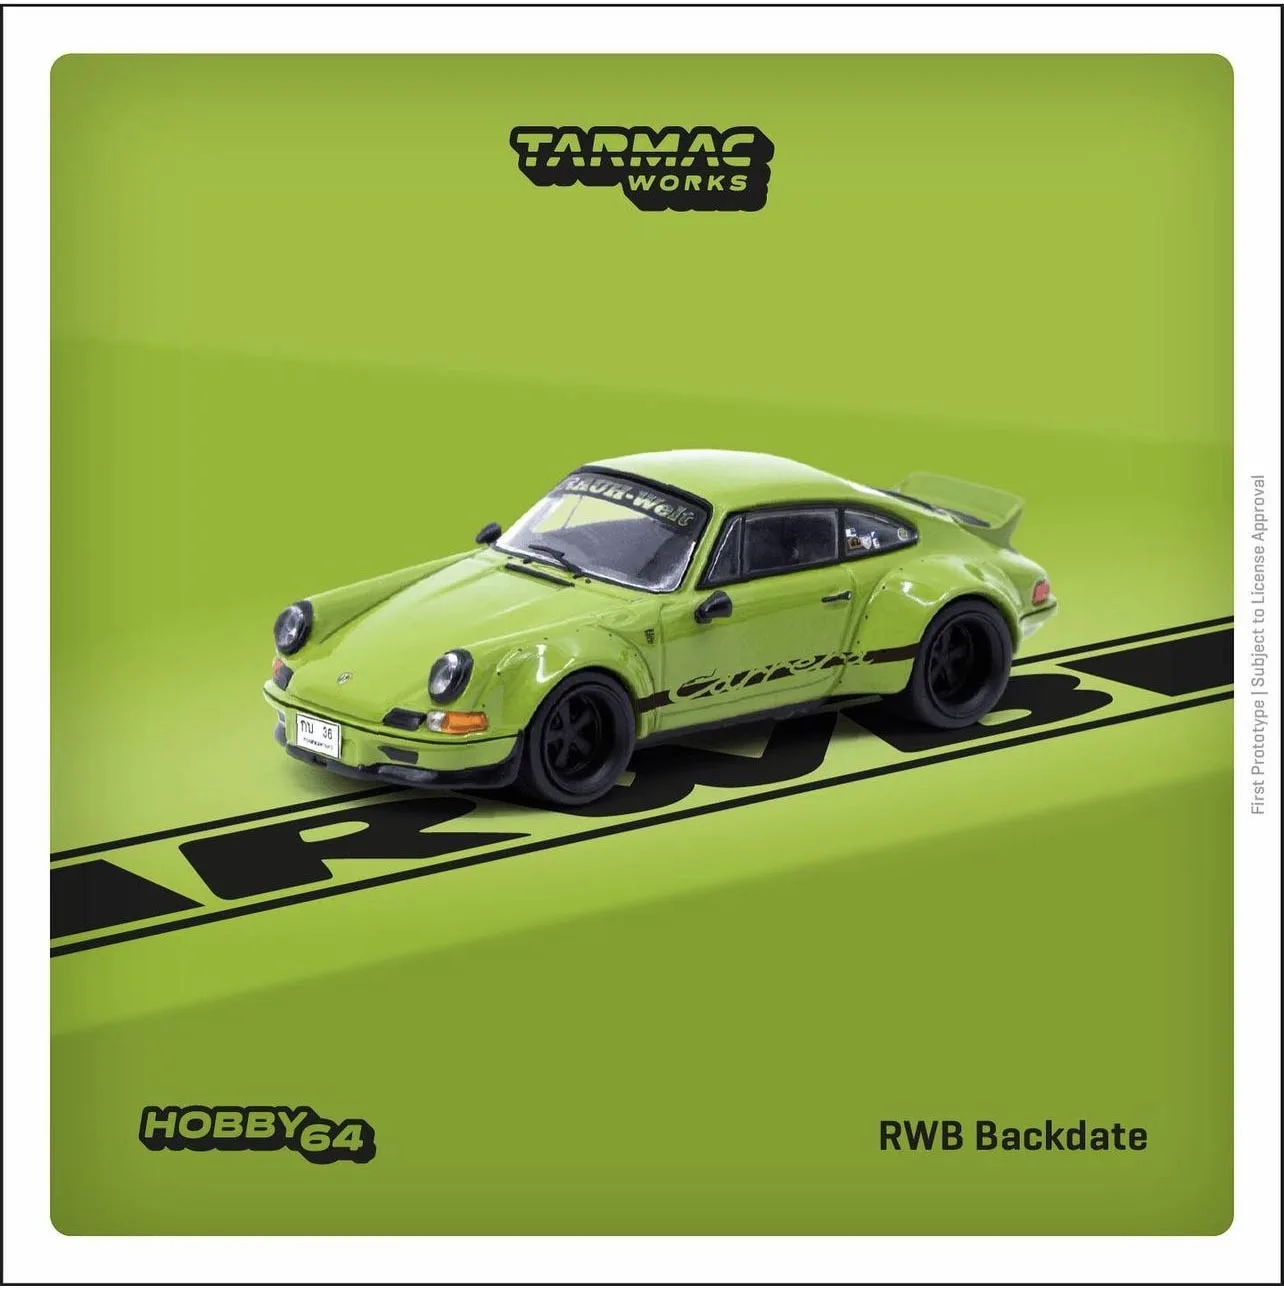 

TW In Stock 1:64 911 964 RWB Backdate Olive Green Alloy Diecast Diorama Car Model Collection Miniature Carros Toys Tarmac Works